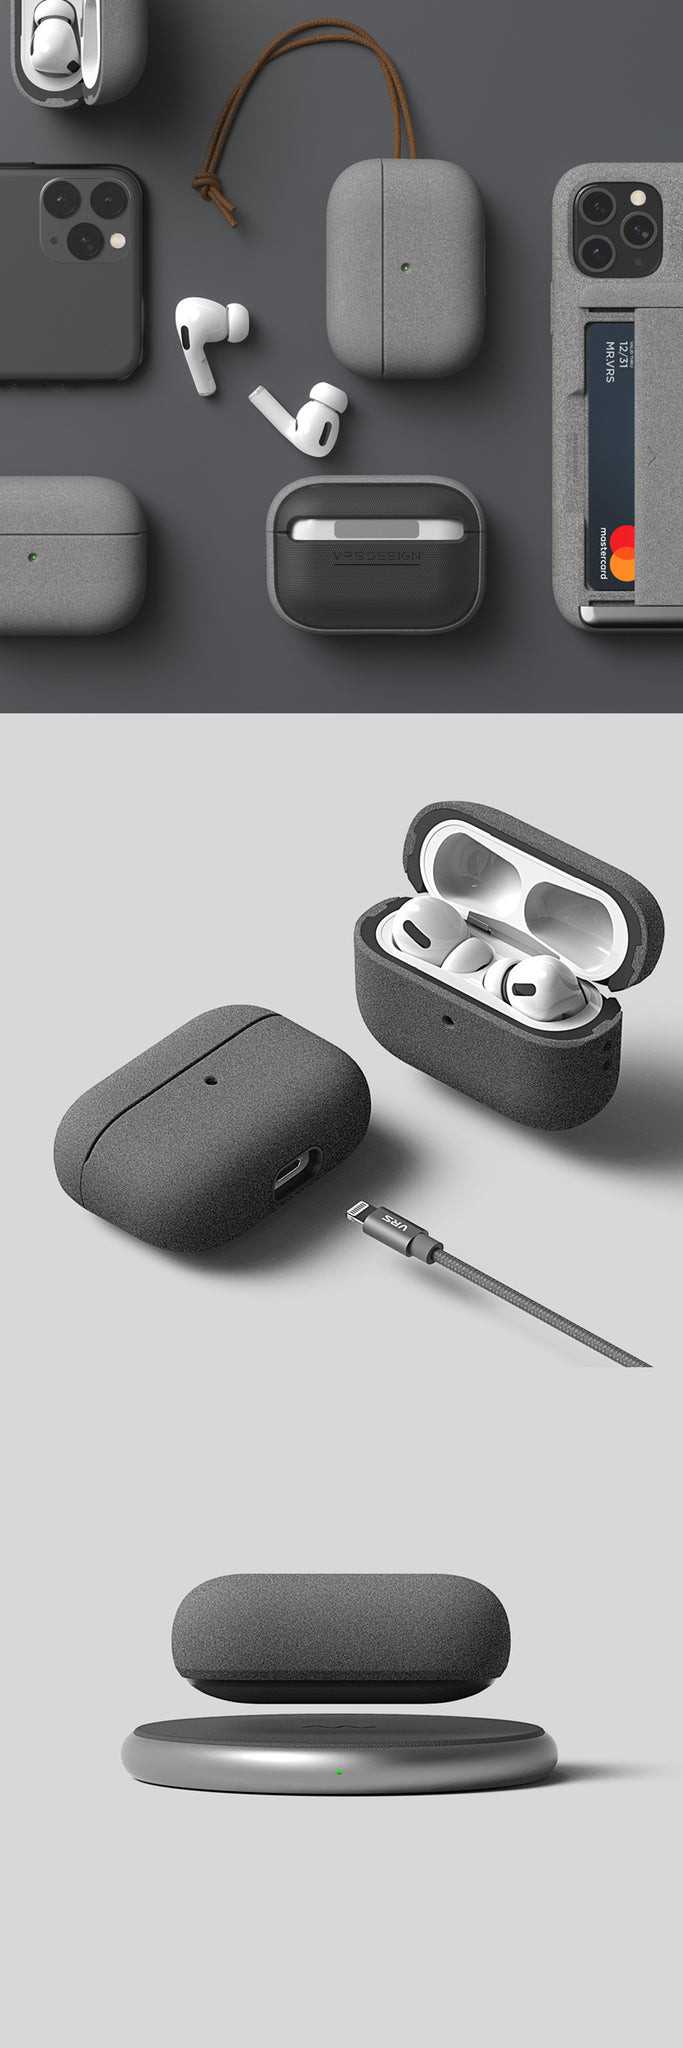 Best Minimalist Apple AirPods Pro Wireless earbuds Accessories and protective case by VRS Design